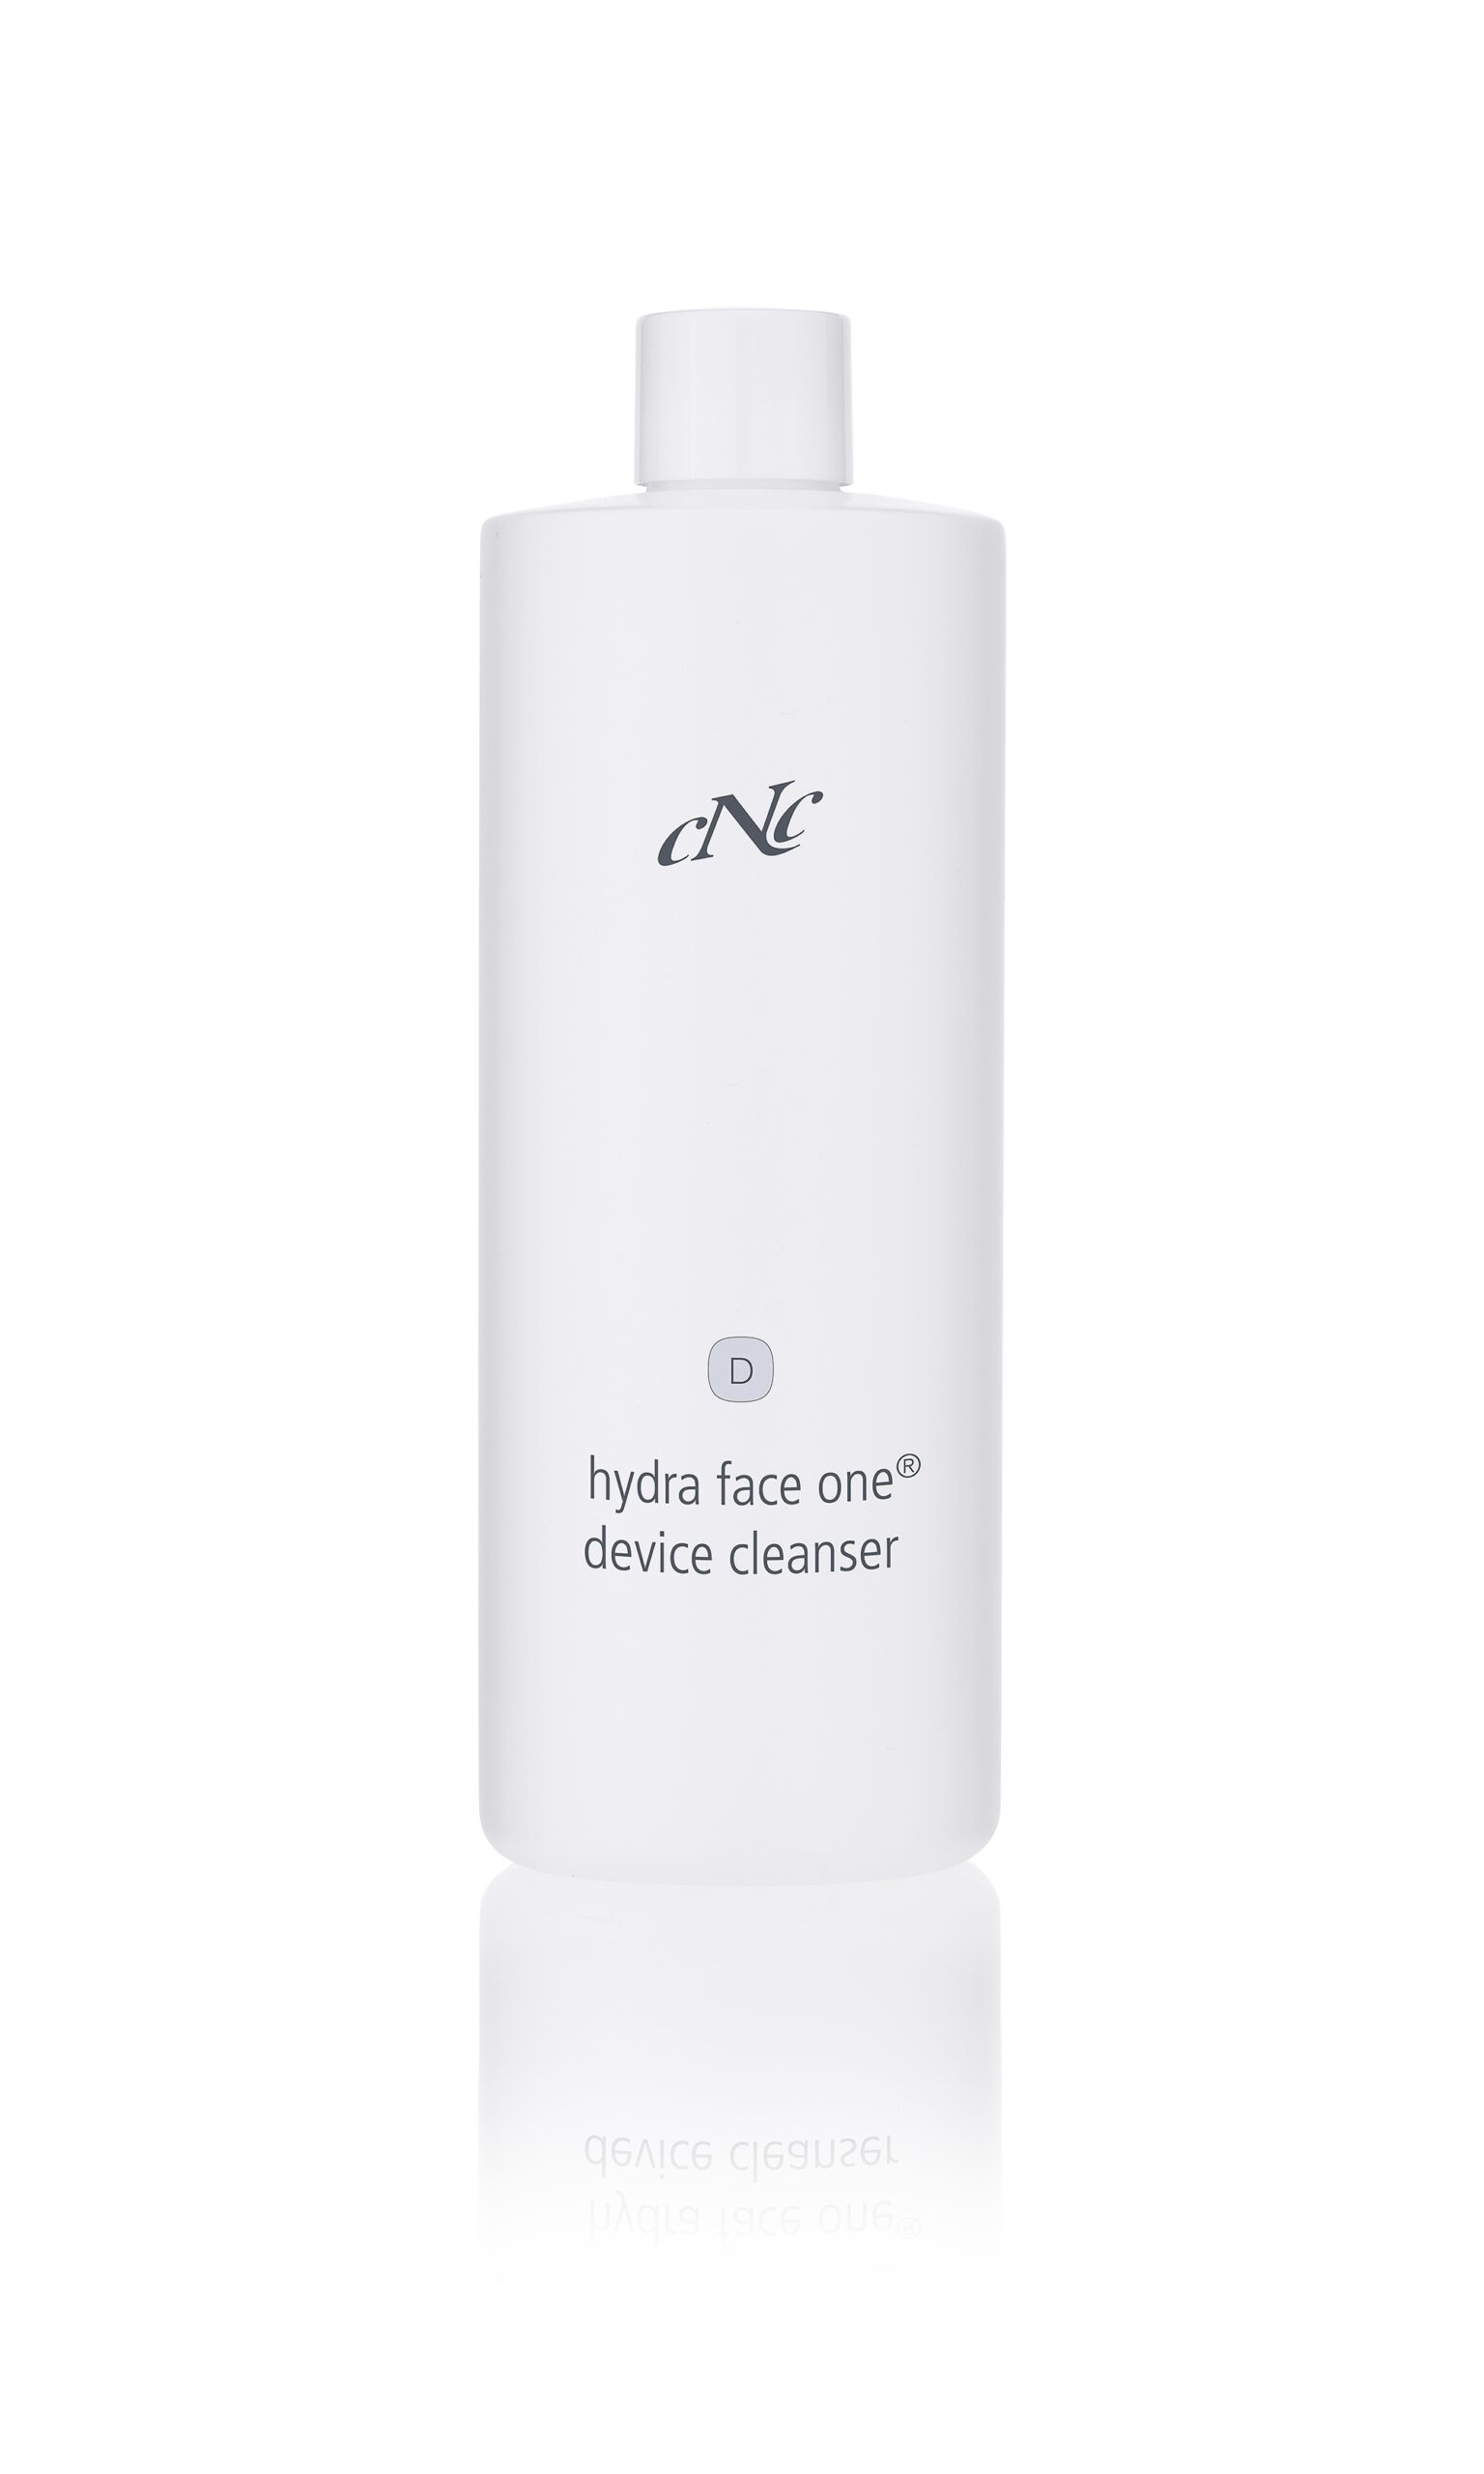 hydra face one device cleanser